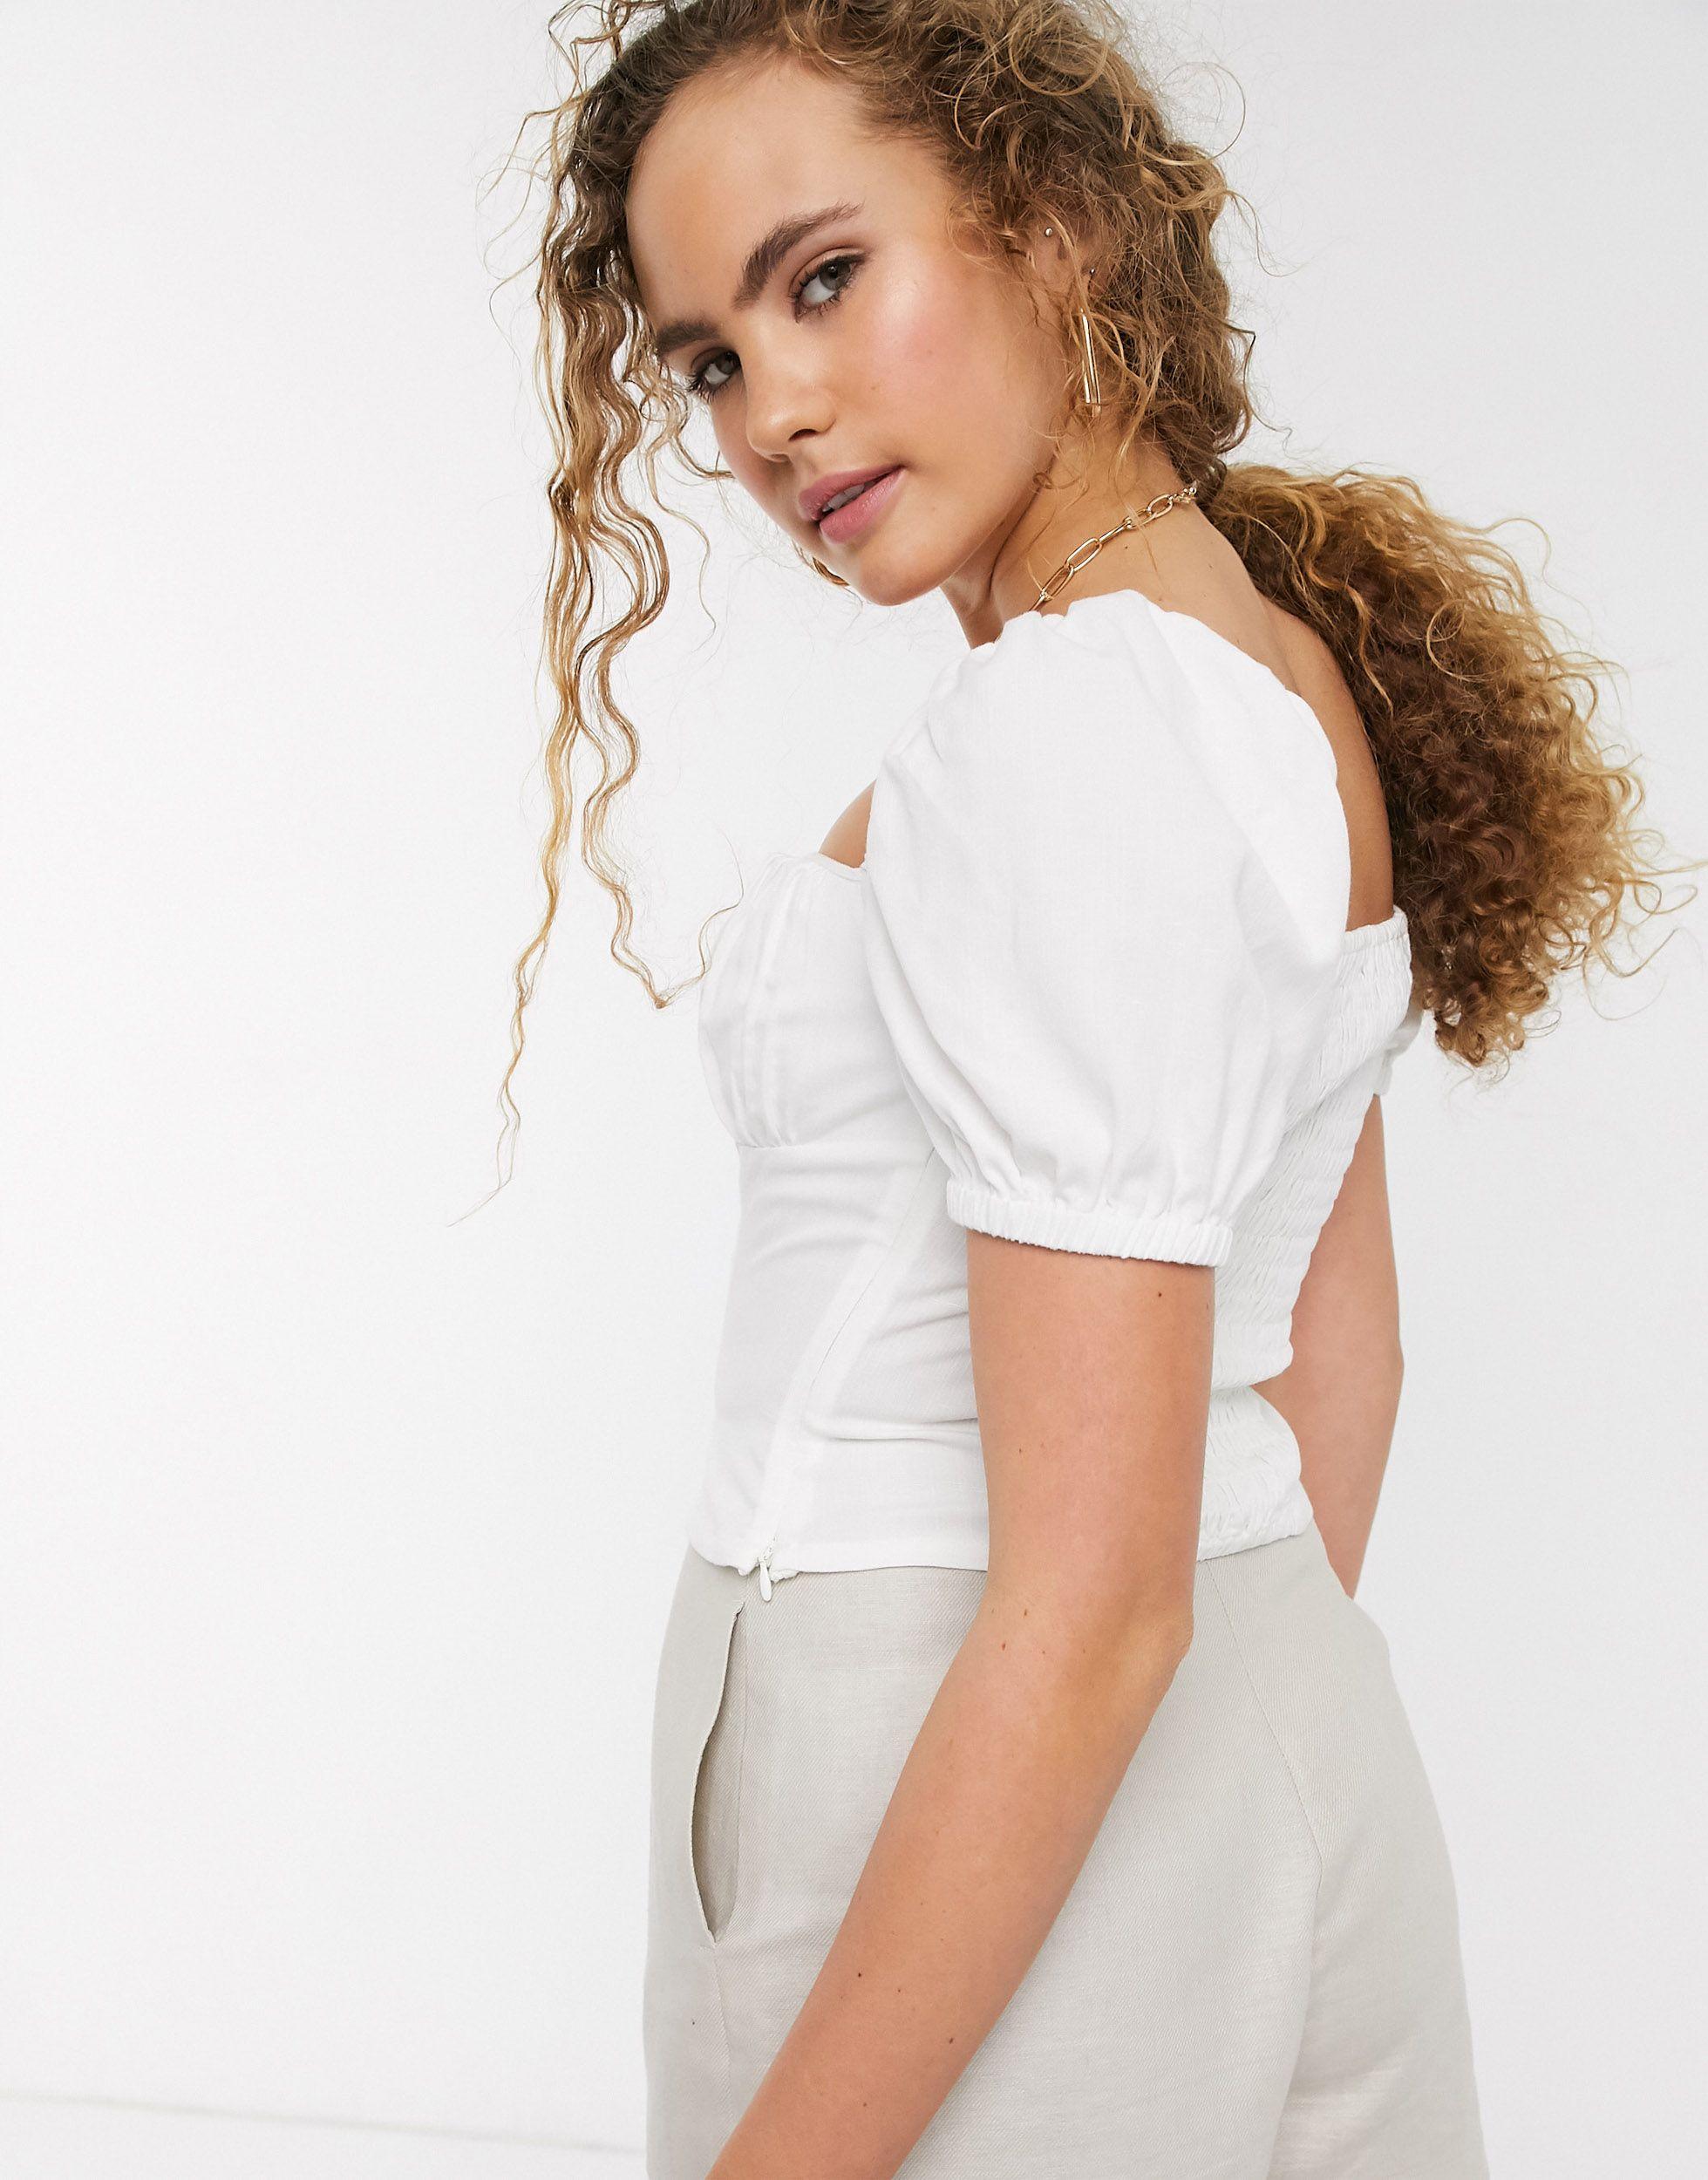 & Other Stories Puff Sleeve Crop Top in White | Lyst